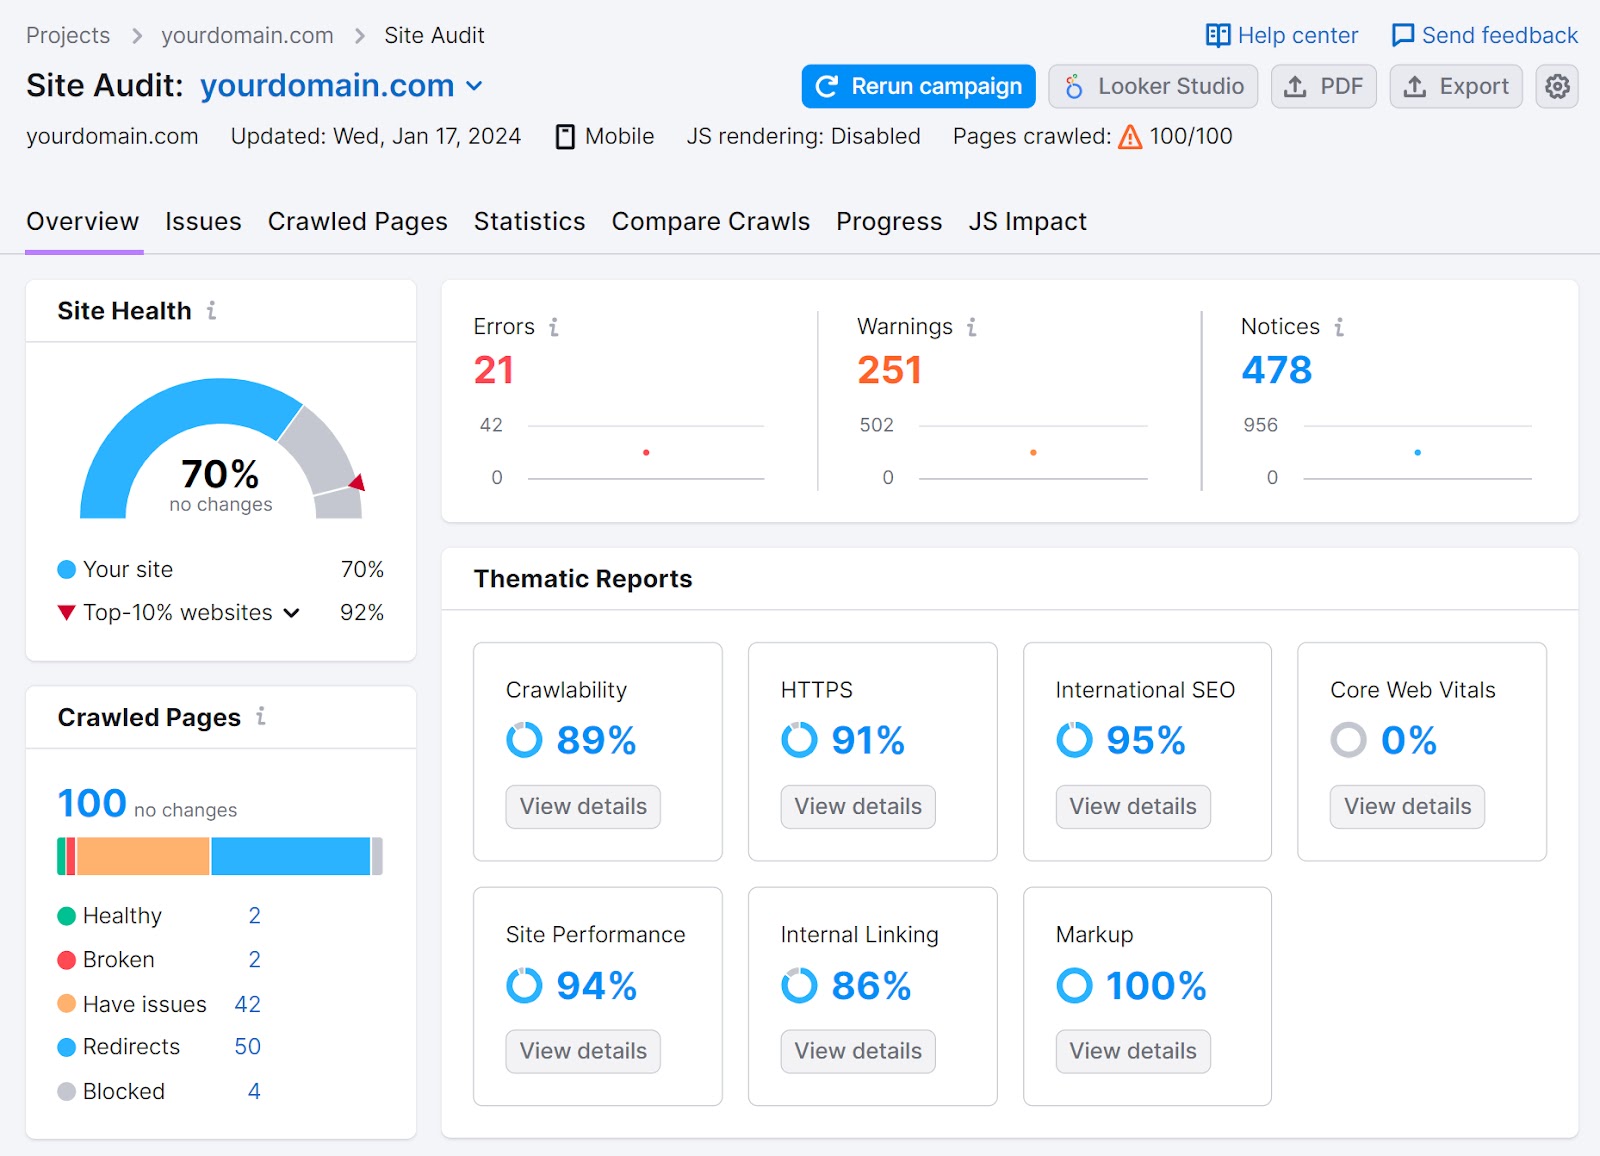 An overview dashboard in Semrush's Site Audit tool